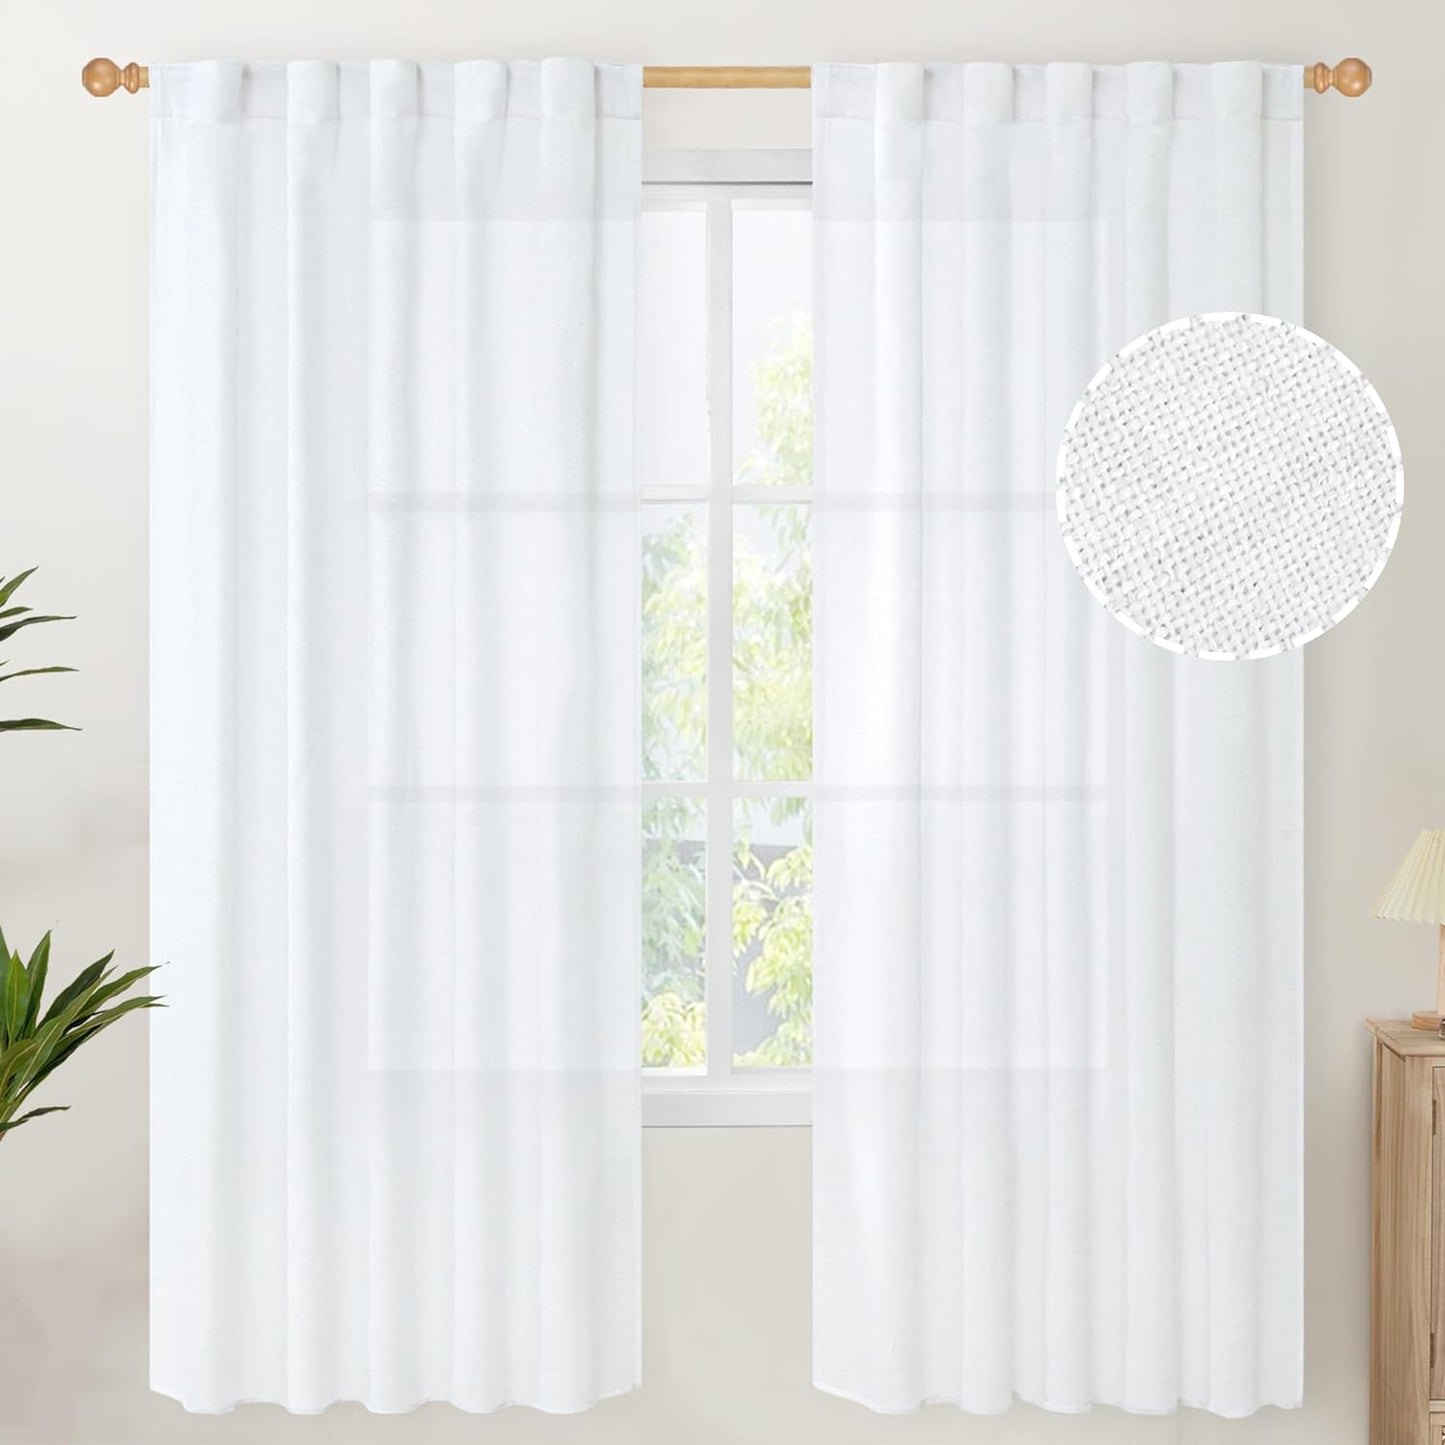 Youngstex Natural Linen Curtains 72 Inch Length 2 Panels for Living Room Light Filtering Textured Window Drapes for Bedroom Dining Office Back Tab Rod Pocket, 52 X 72 Inch  YoungsTex White 42W X 72L 